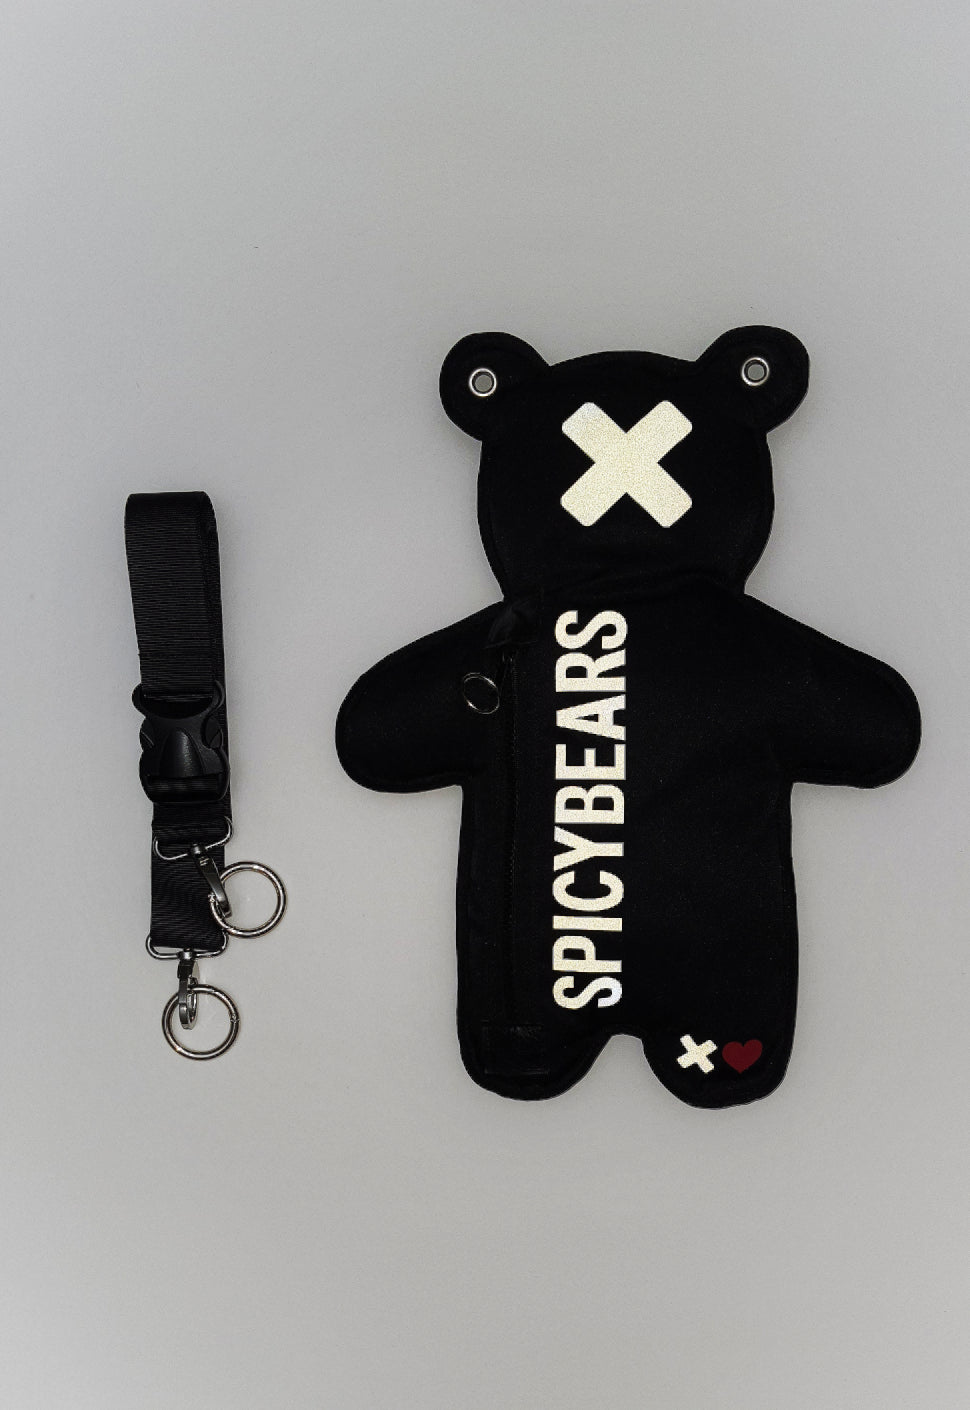 Total Black Reflective | SPICYBEARS Valentine's Day Edition - SPICYBEARS